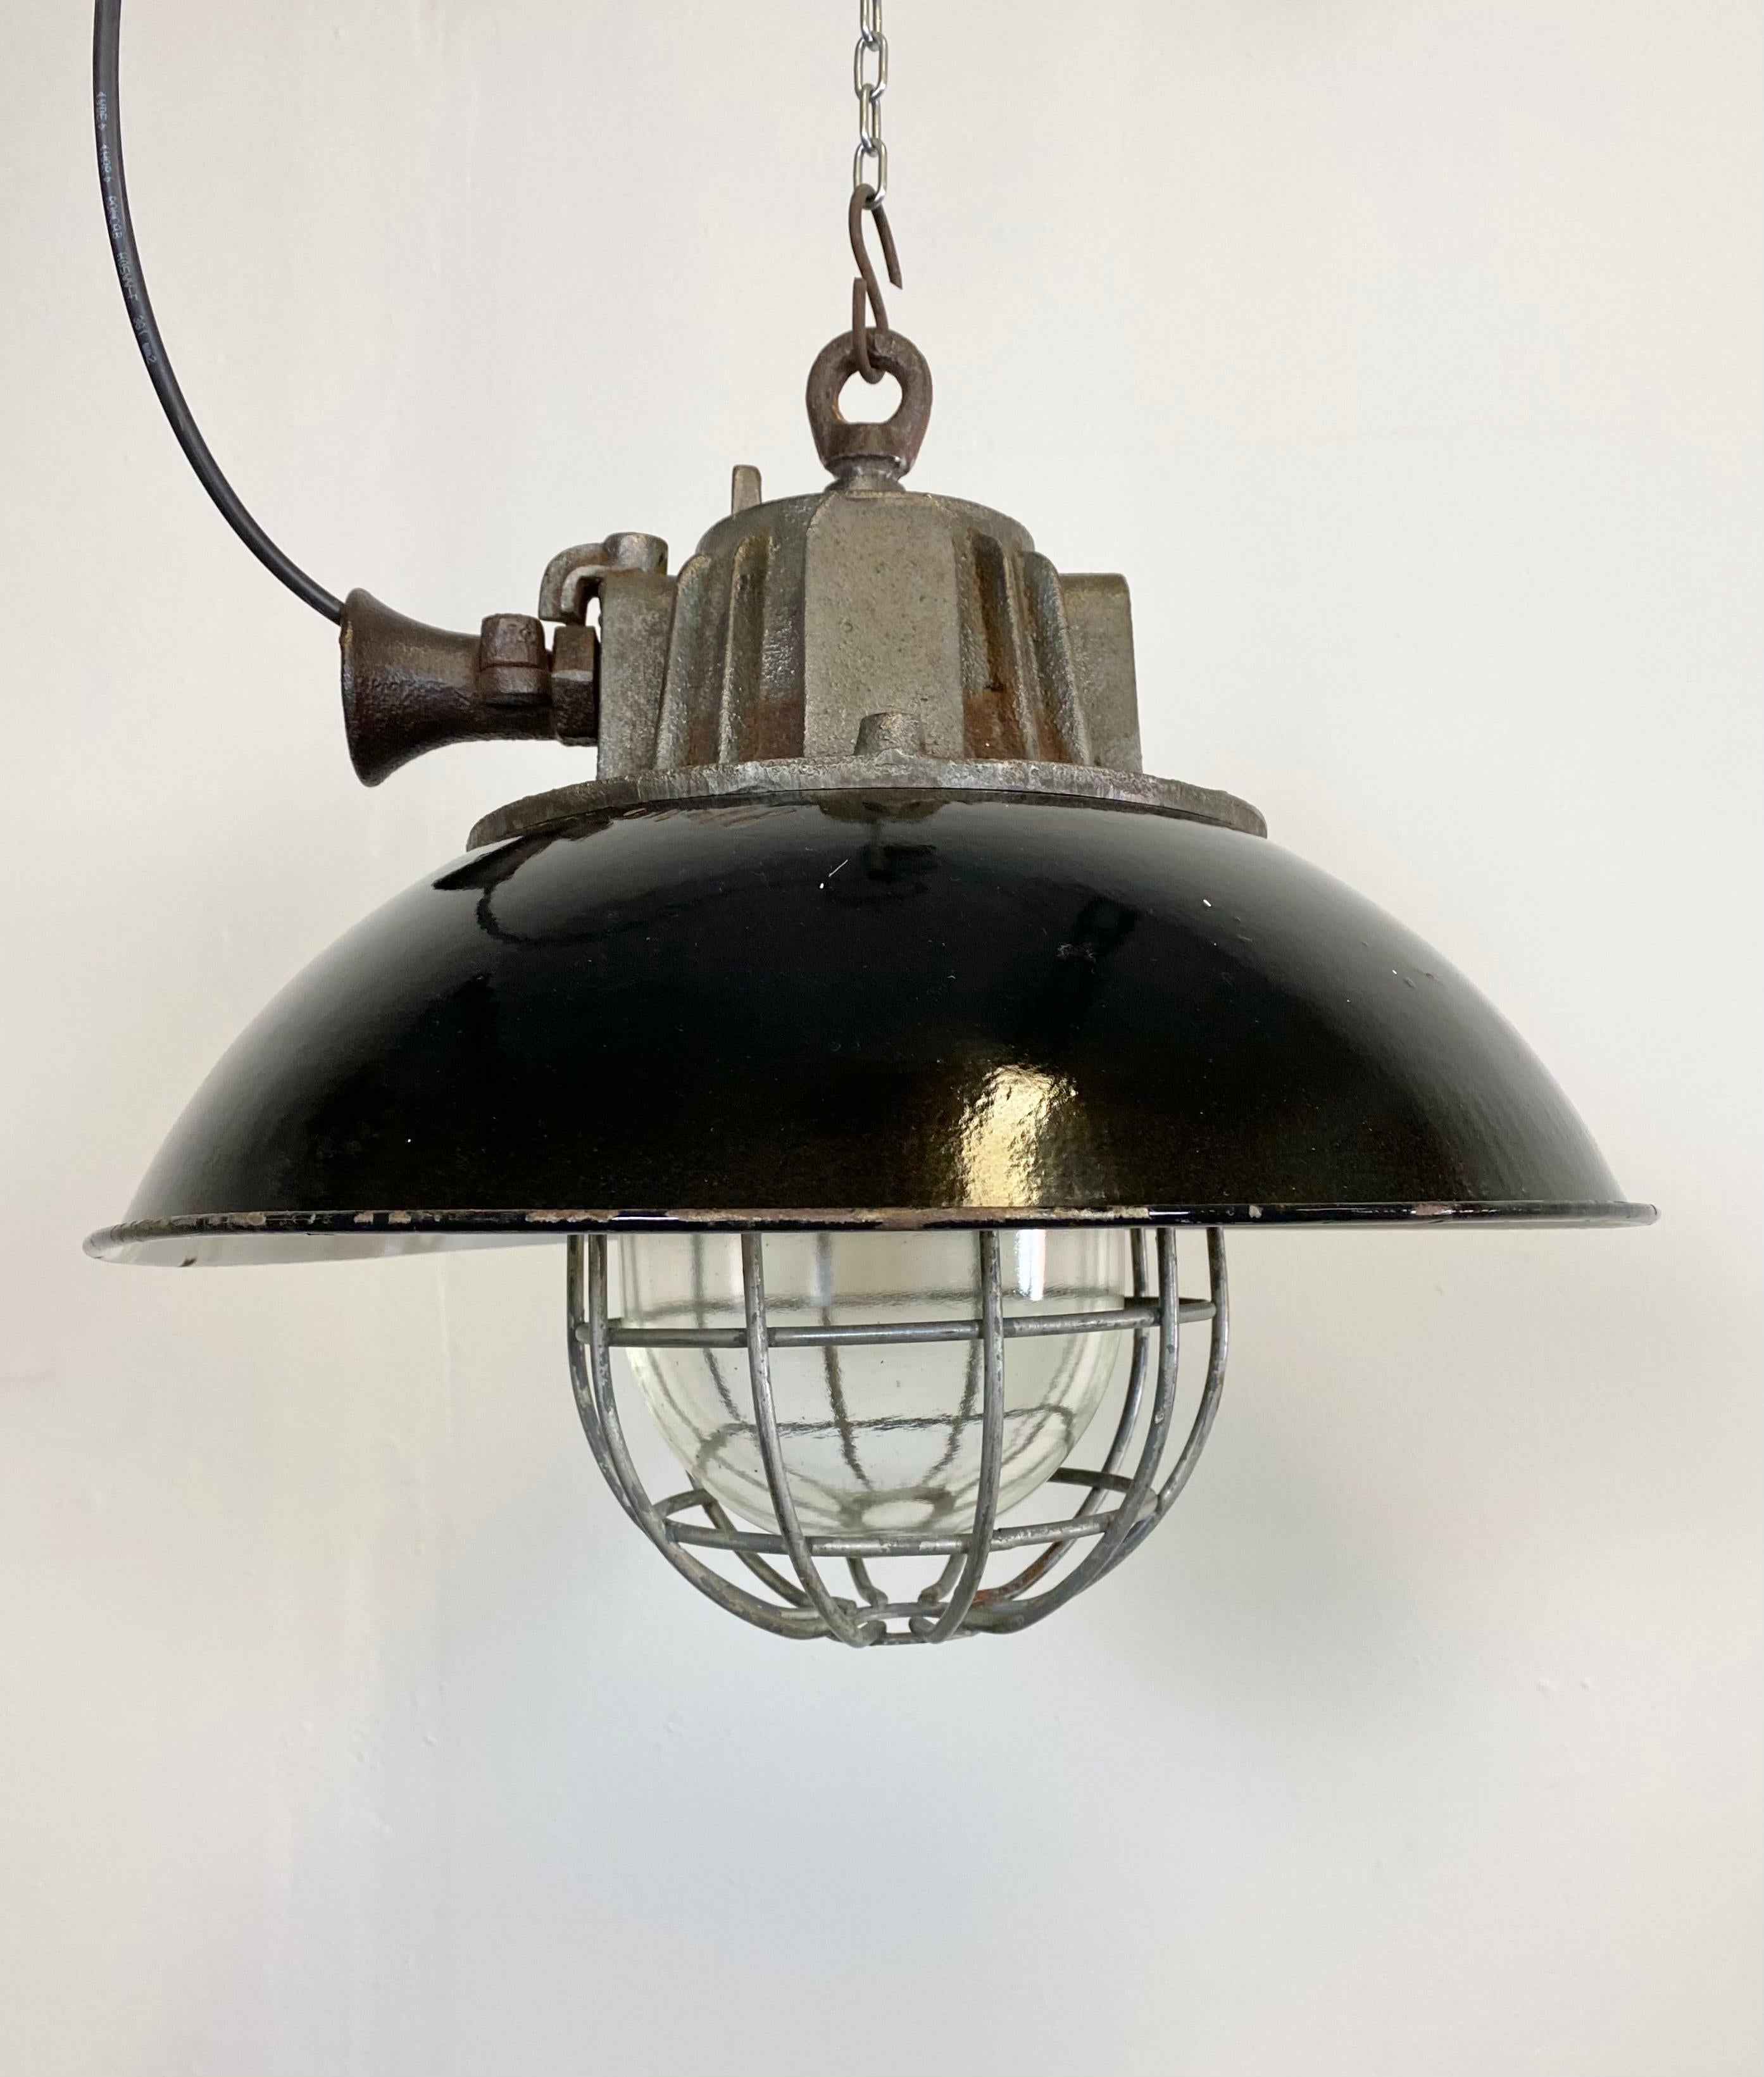 Industrial hanging lamp manufactured during the 1950s in former Czechoslovakia. It features a black enamel shade, white enamel interior, cast iron top, clear glass cover and iron grid. Porcelain socket for E 27 lightbulbs and new wire. The weight of